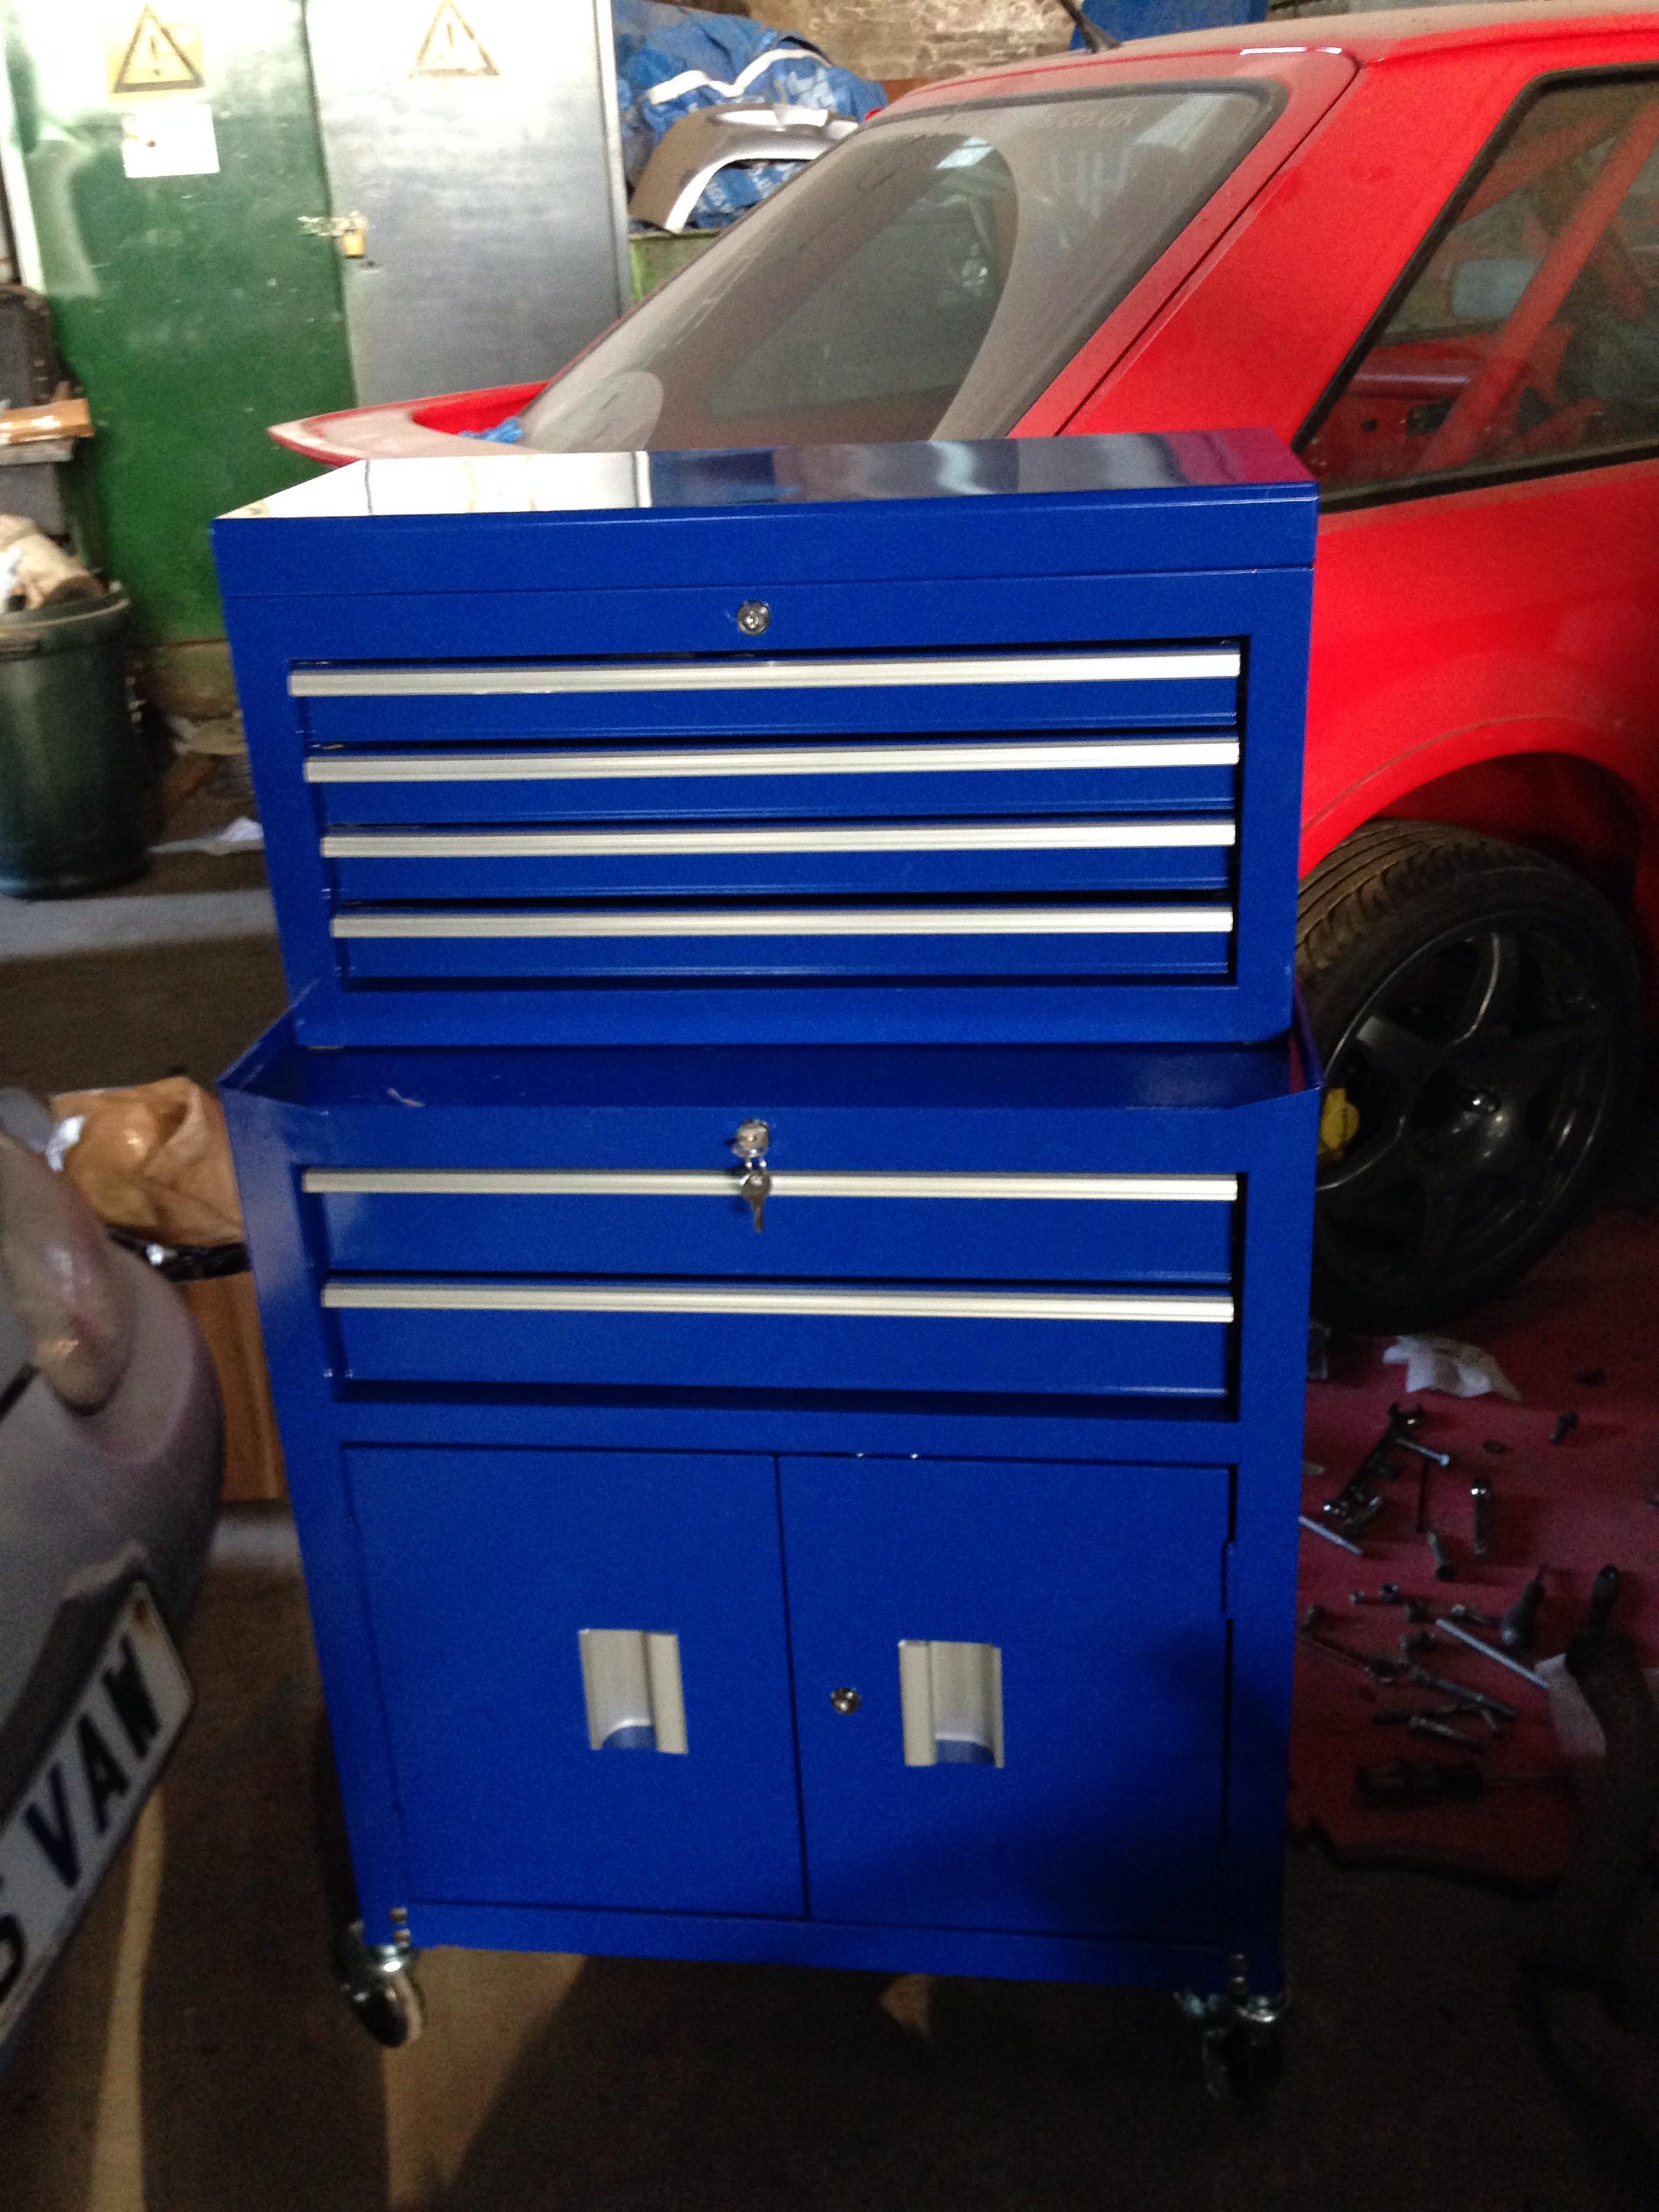 Cheap tool box this weekend at Halfords! - PassionFord - Ford Focus, Escort  & RS Forum Discussion